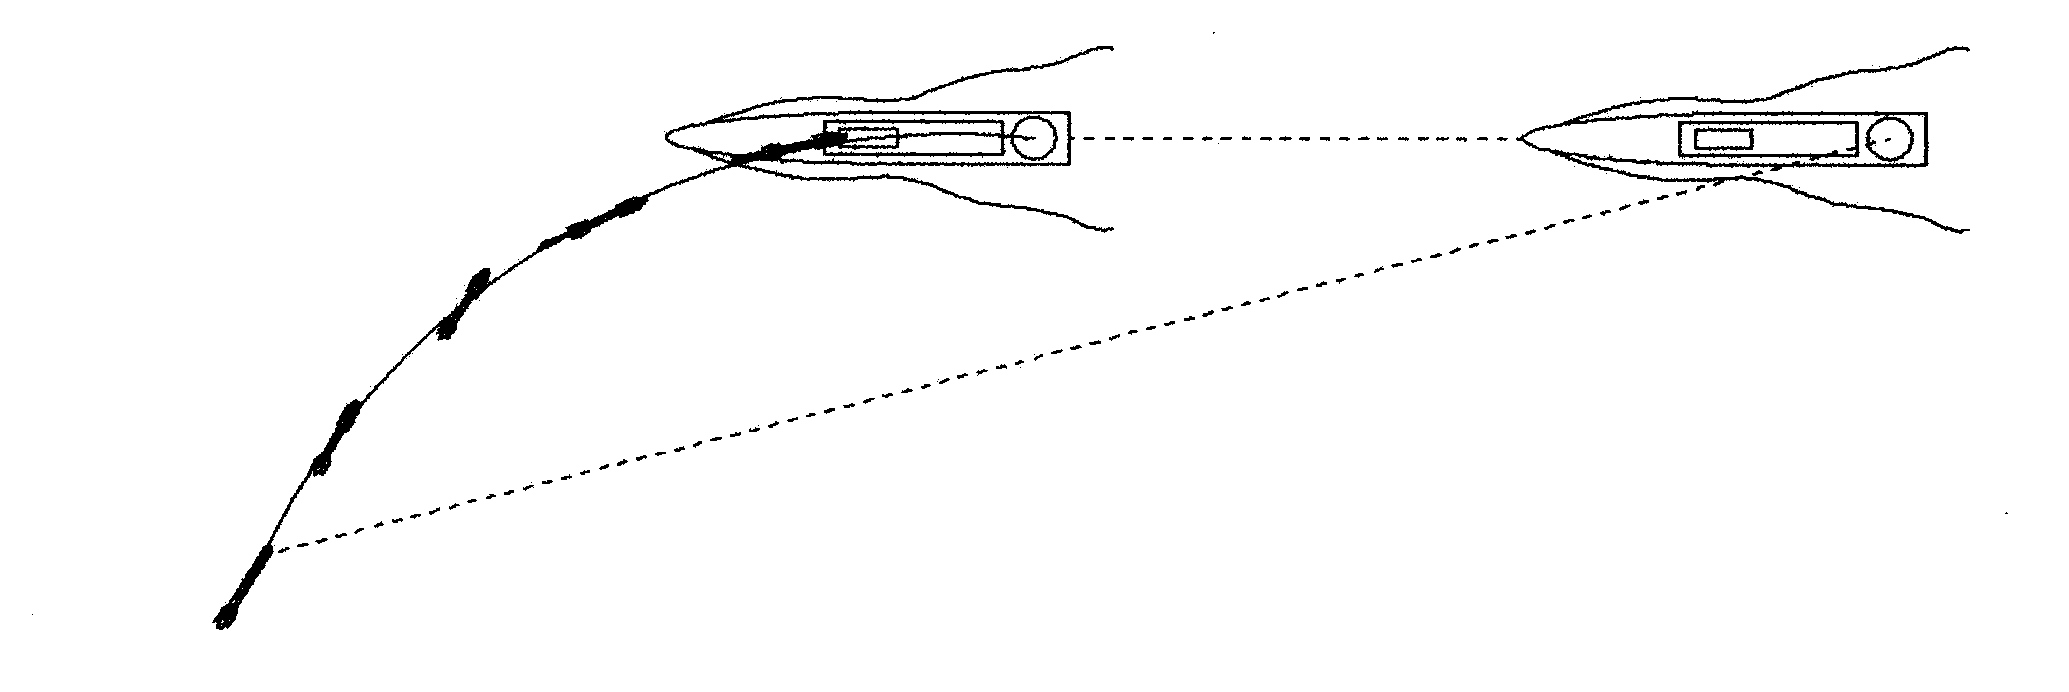 Diving/buoyancy power/gliding (missile/torpedo) system